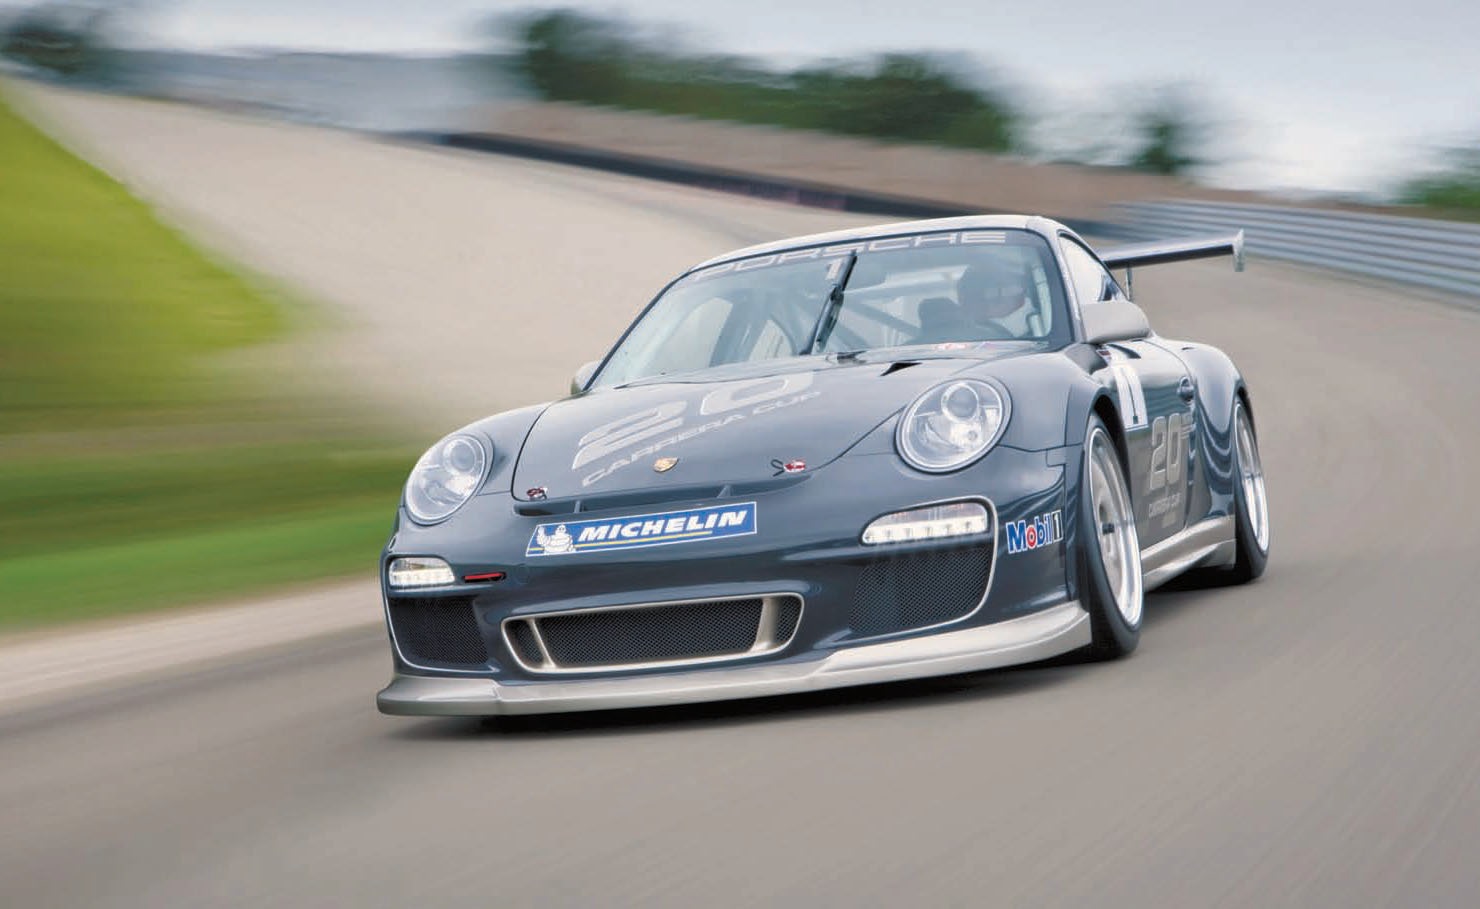 The 2009 GT3 Cup car tested extensively at Weissach before heading out among customers and competitors. It was the first 911 race car to use the new DFI direct fuel injection system. Porsche Archiv